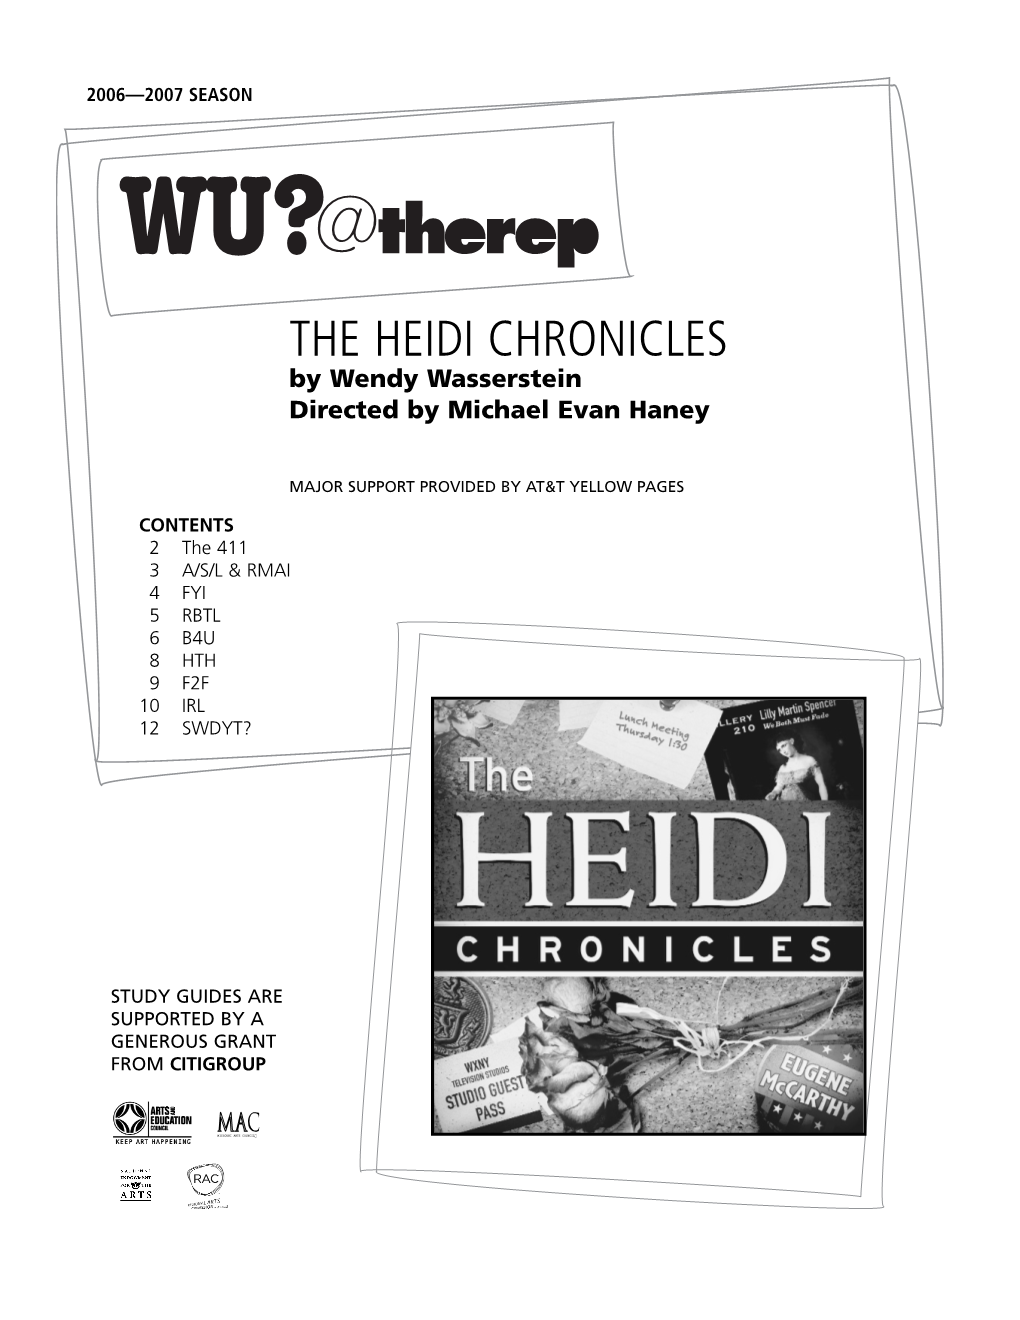 THE HEIDI CHRONICLES by Wendy Wasserstein Directed by Michael Evan Haney